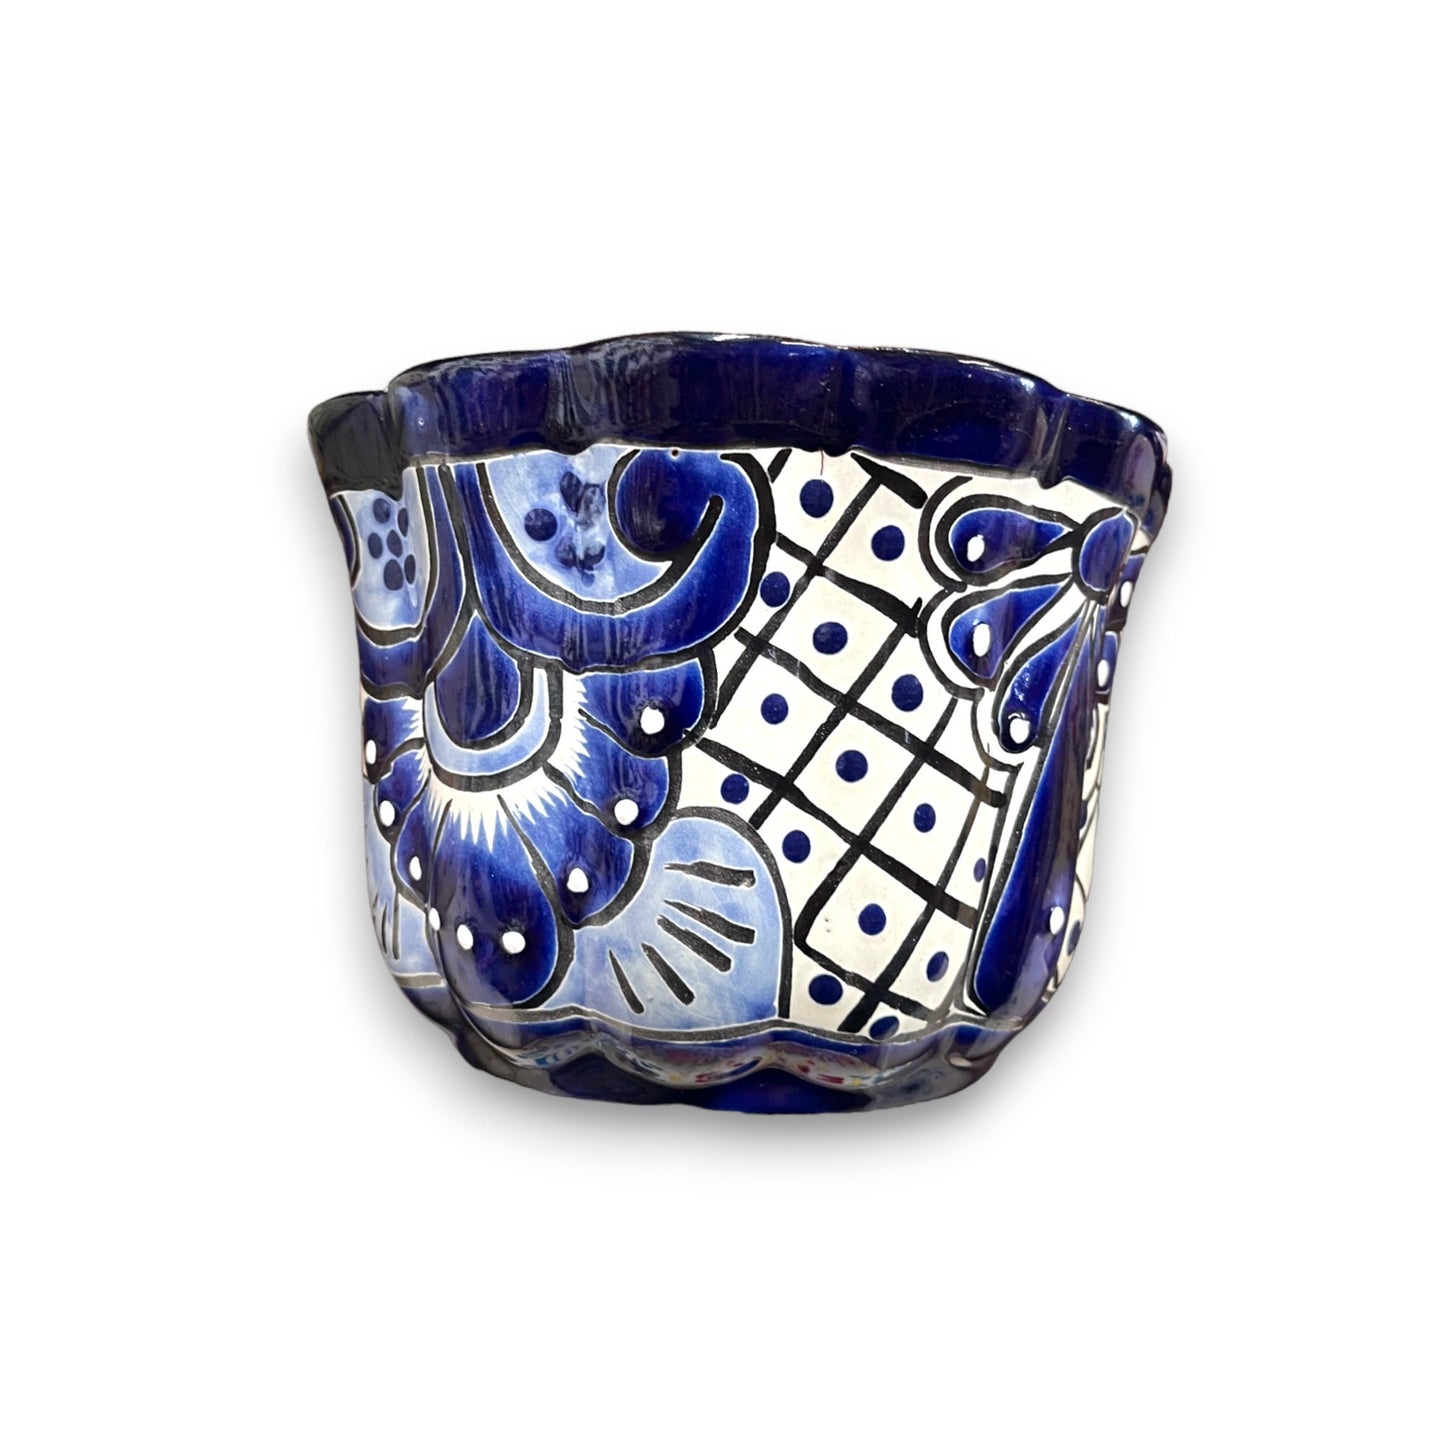 Handcrafted Talavera Ceramic Planter | Colorful Blue & White Mexican Pottery